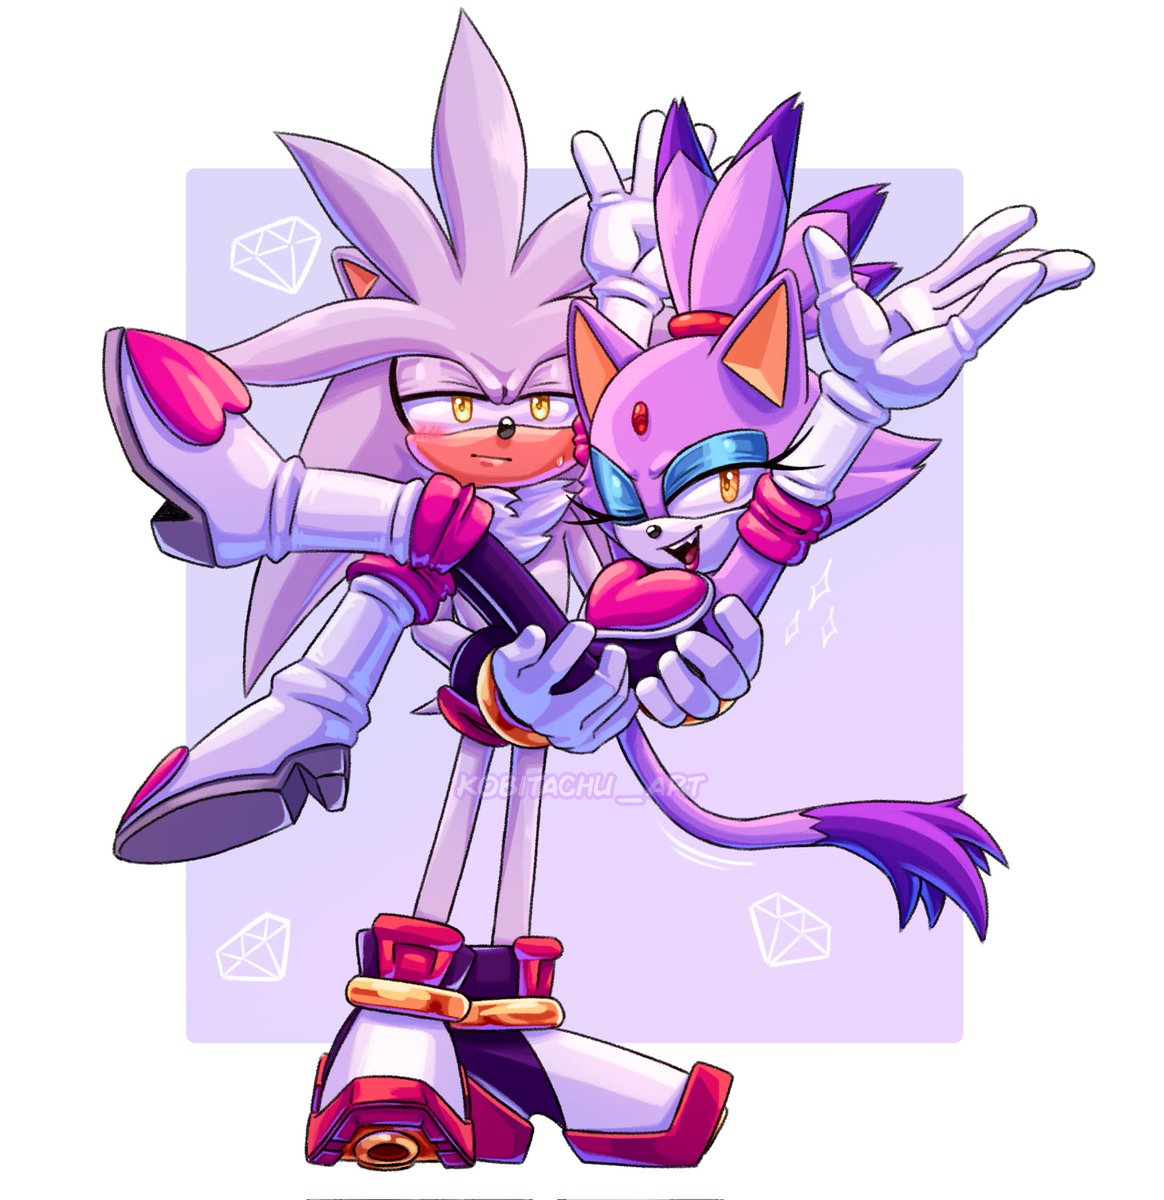 C💜🤍mm for @QRJP09!

Thank you so much for this! It was fun to do!

Also #Silvaze, they're a pretty couple 👌✨